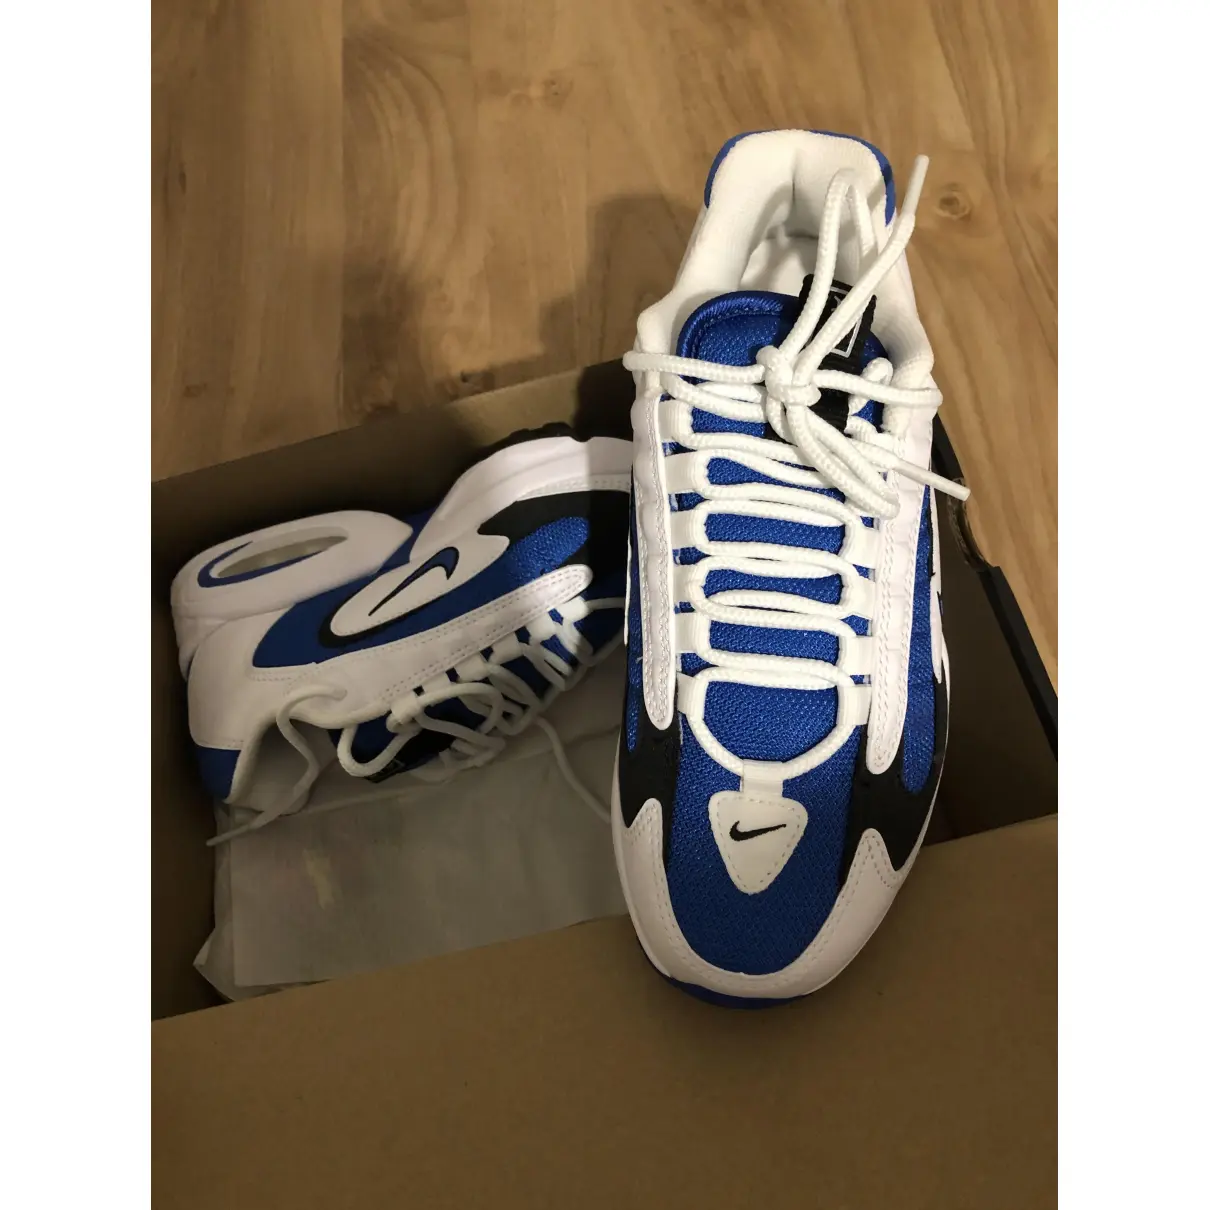 Buy Nike Air Max  leather trainers online